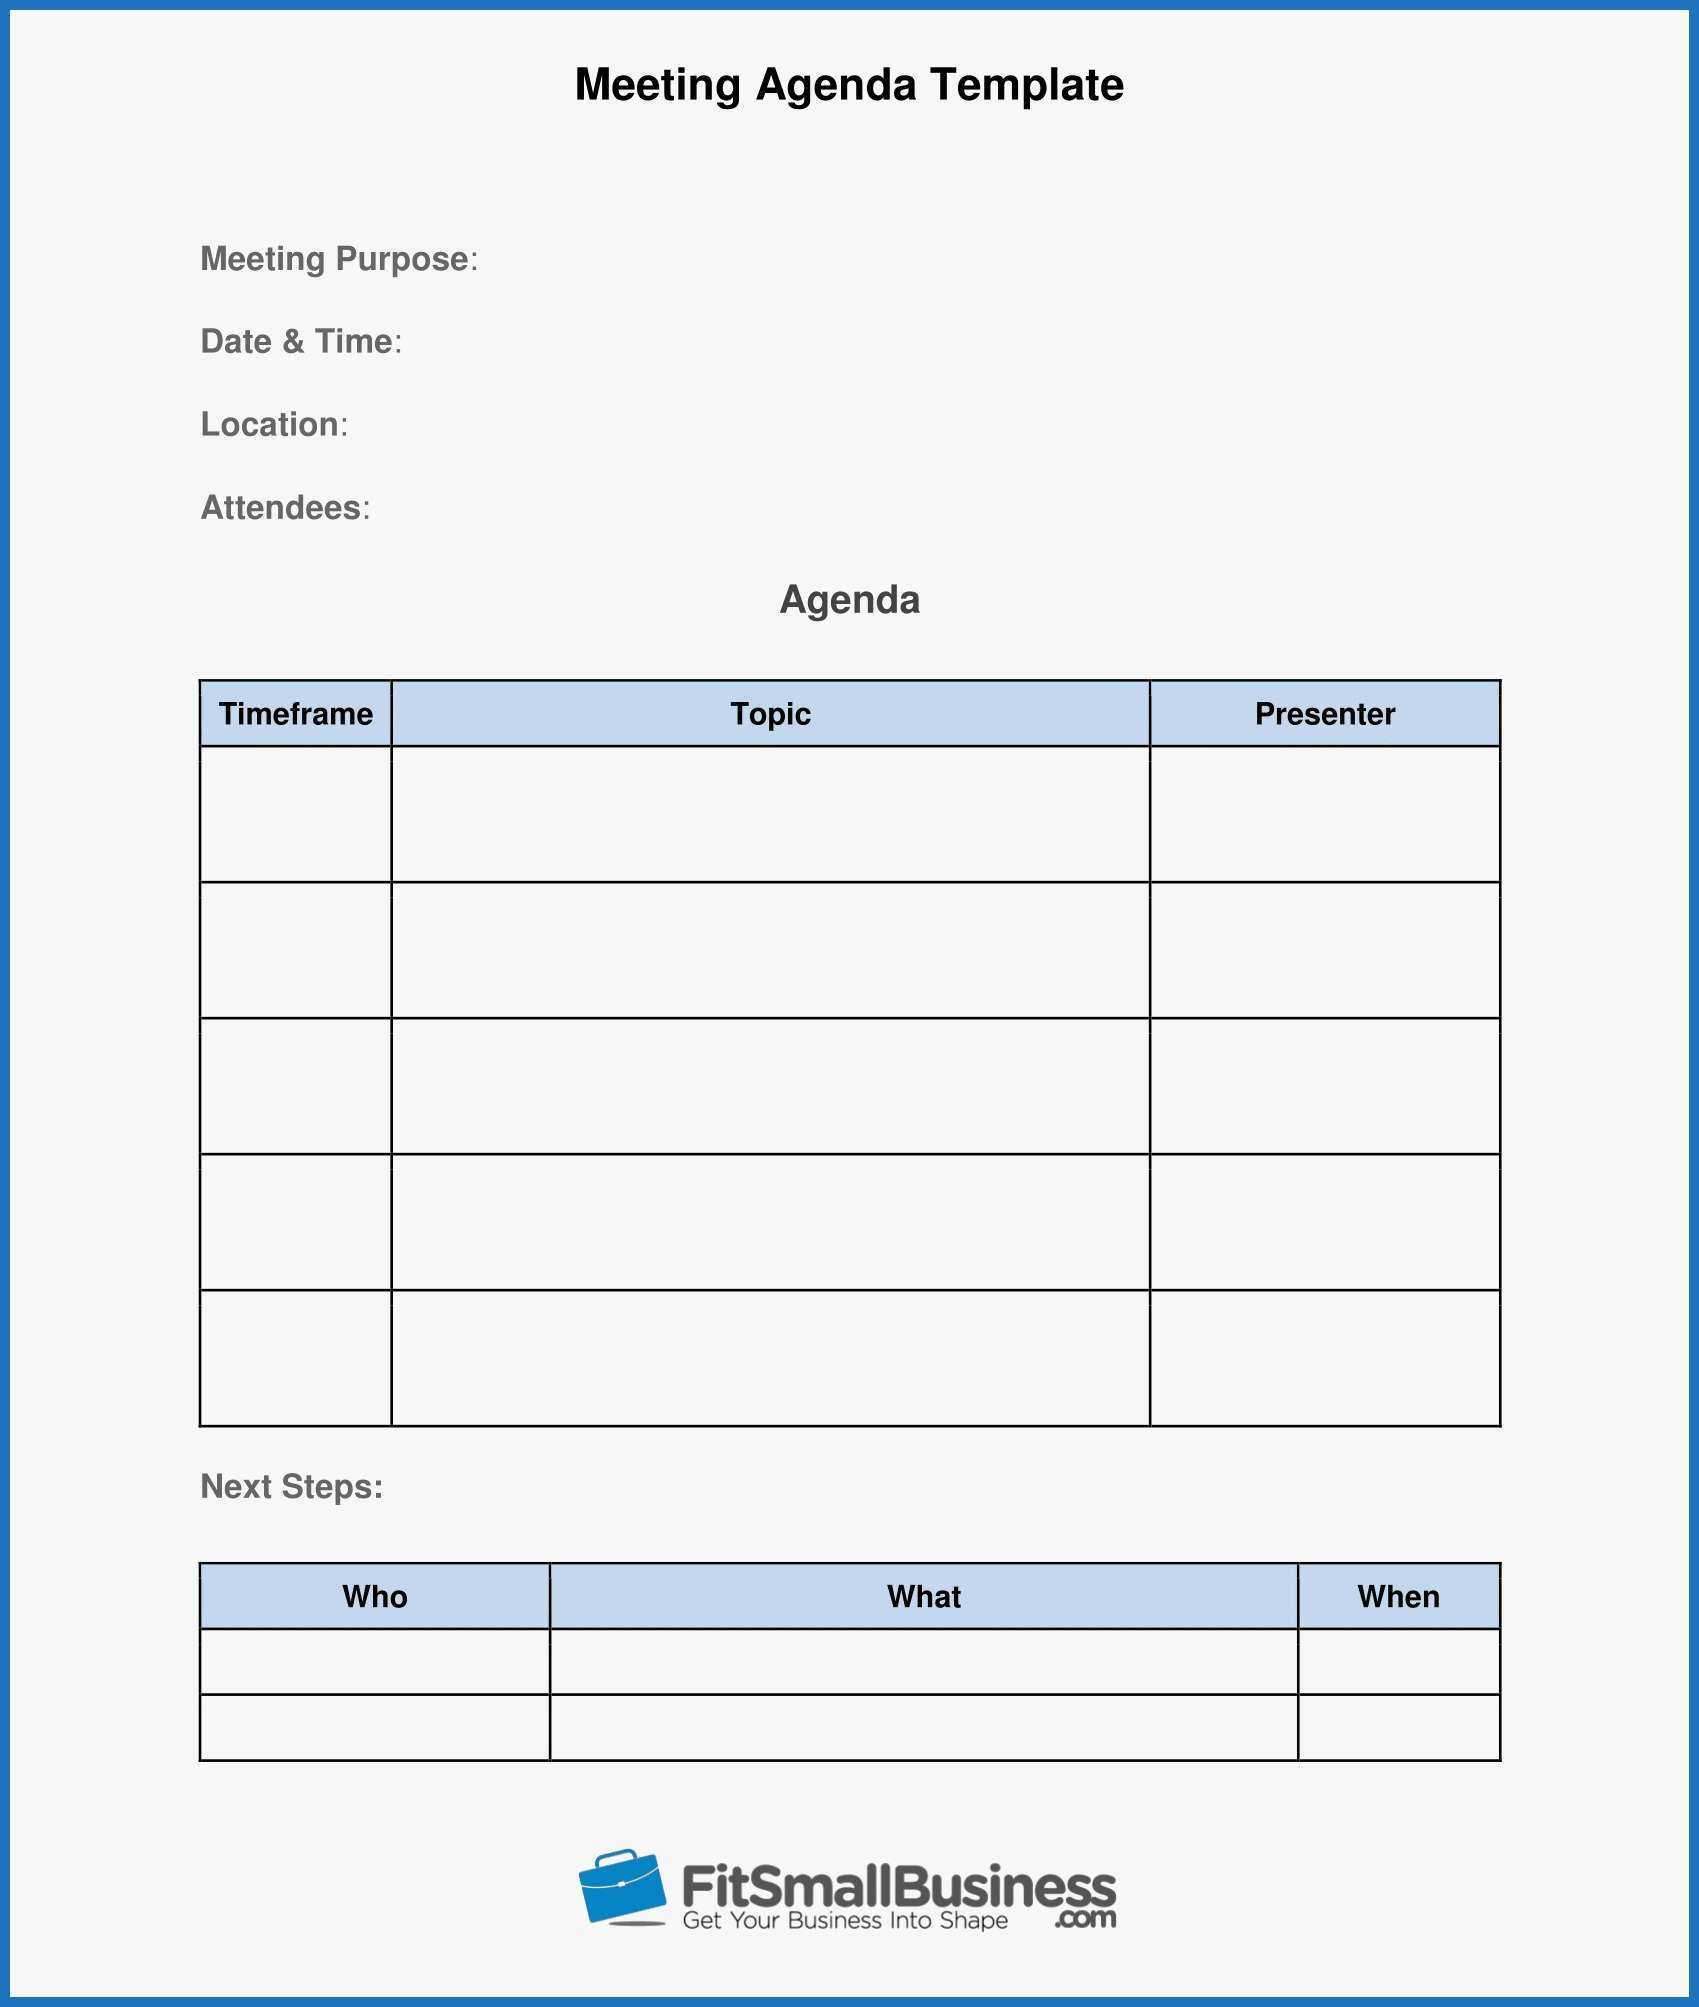 025 Free Meeting Agenda Template Word One On Templates For Pertaining To Free Meeting Agenda Templates For Word